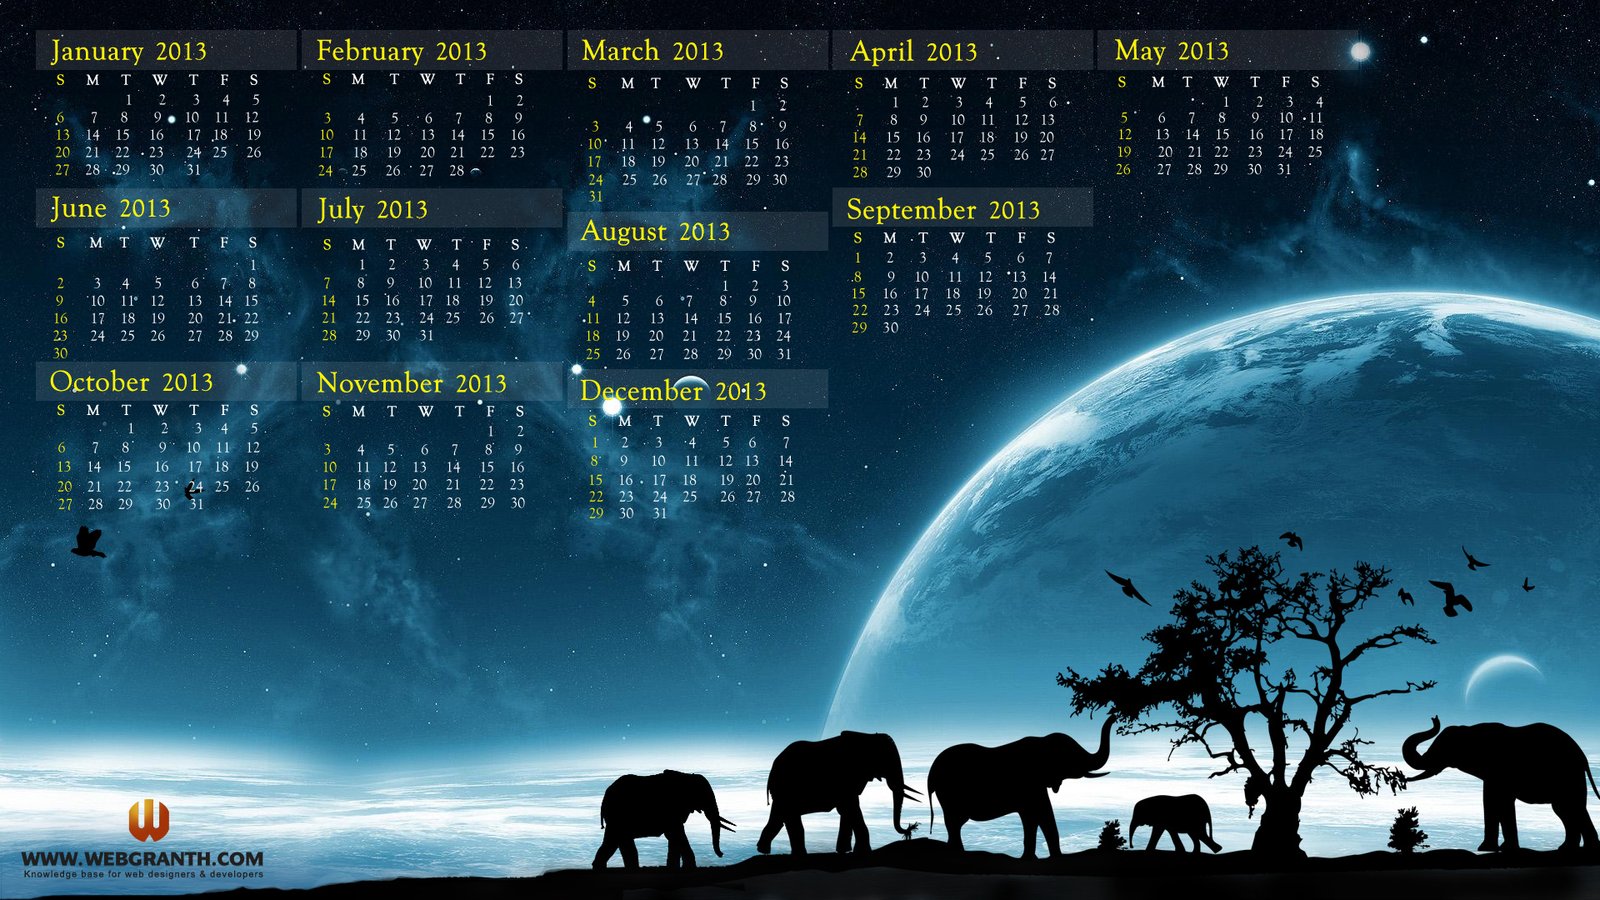 Animated HD Wallpaper calendar 2013 (1) View HD Image of Animated HD